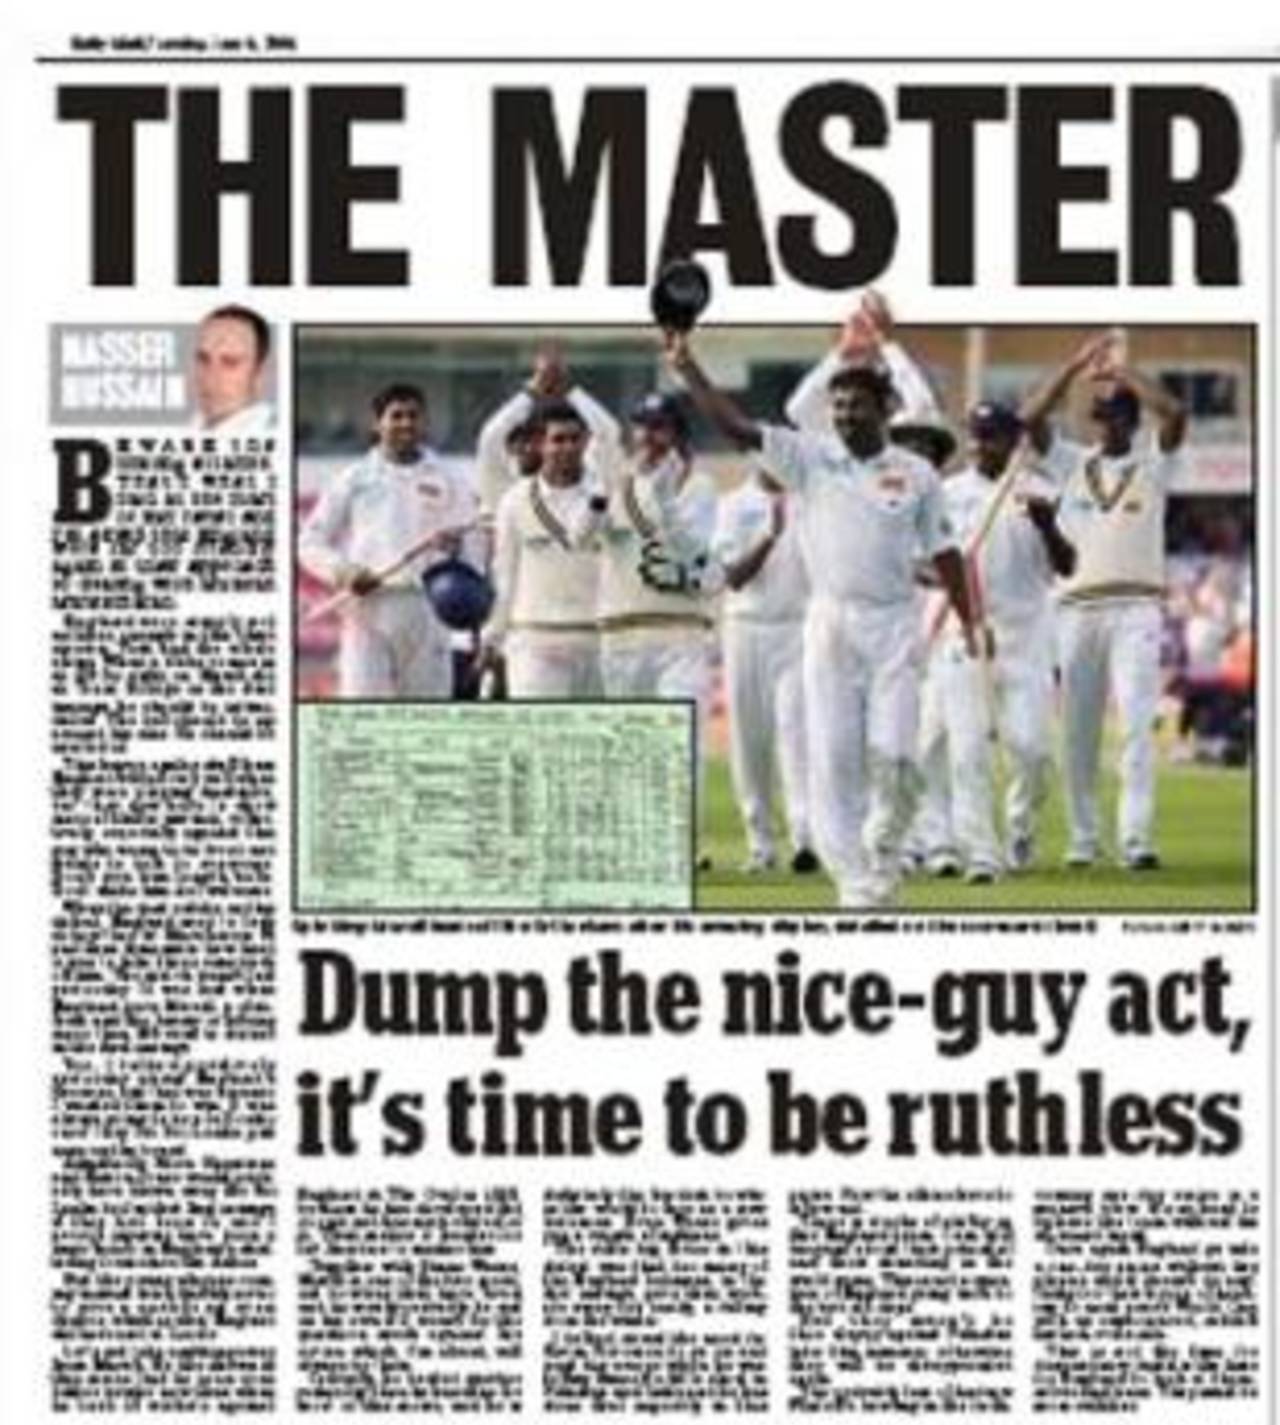 Few have complained about Murali's genial nature&nbsp;&nbsp;&bull;&nbsp;&nbsp;Daily Mail